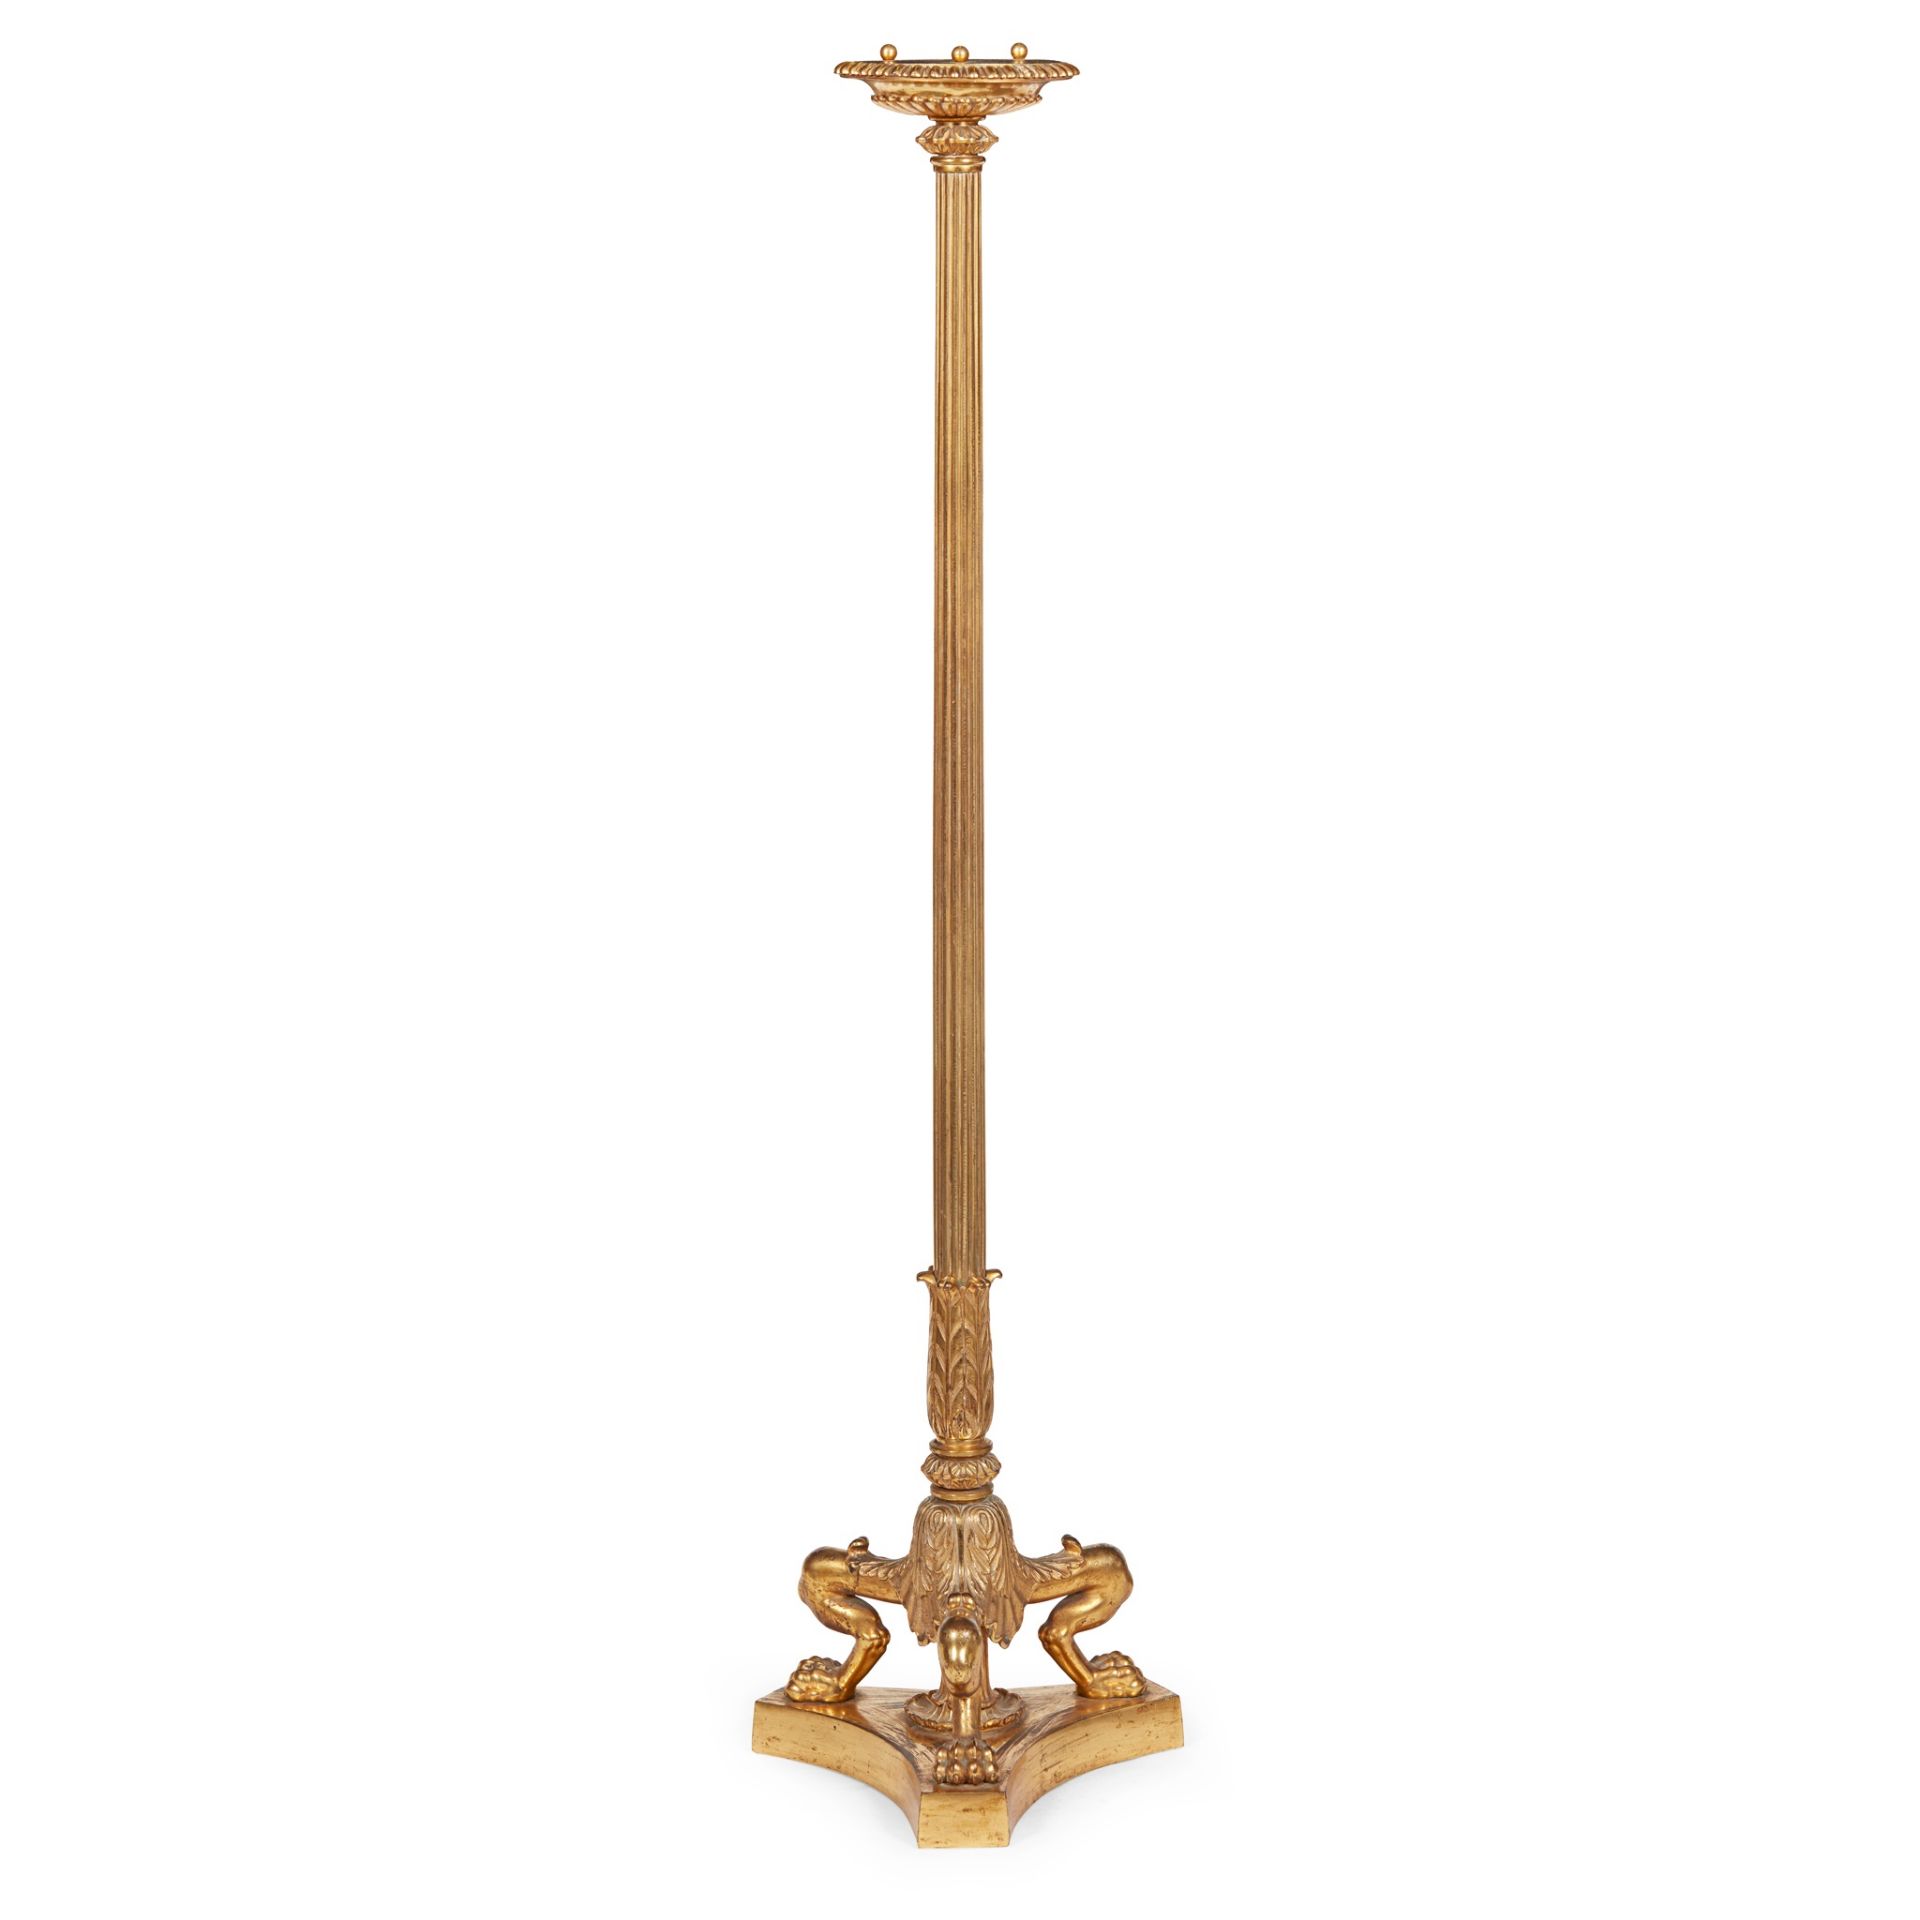 GILT METAL STANDARD LAMP, IN THE MANNER OF THOMAS HOPE EARLY 20TH CENTURY